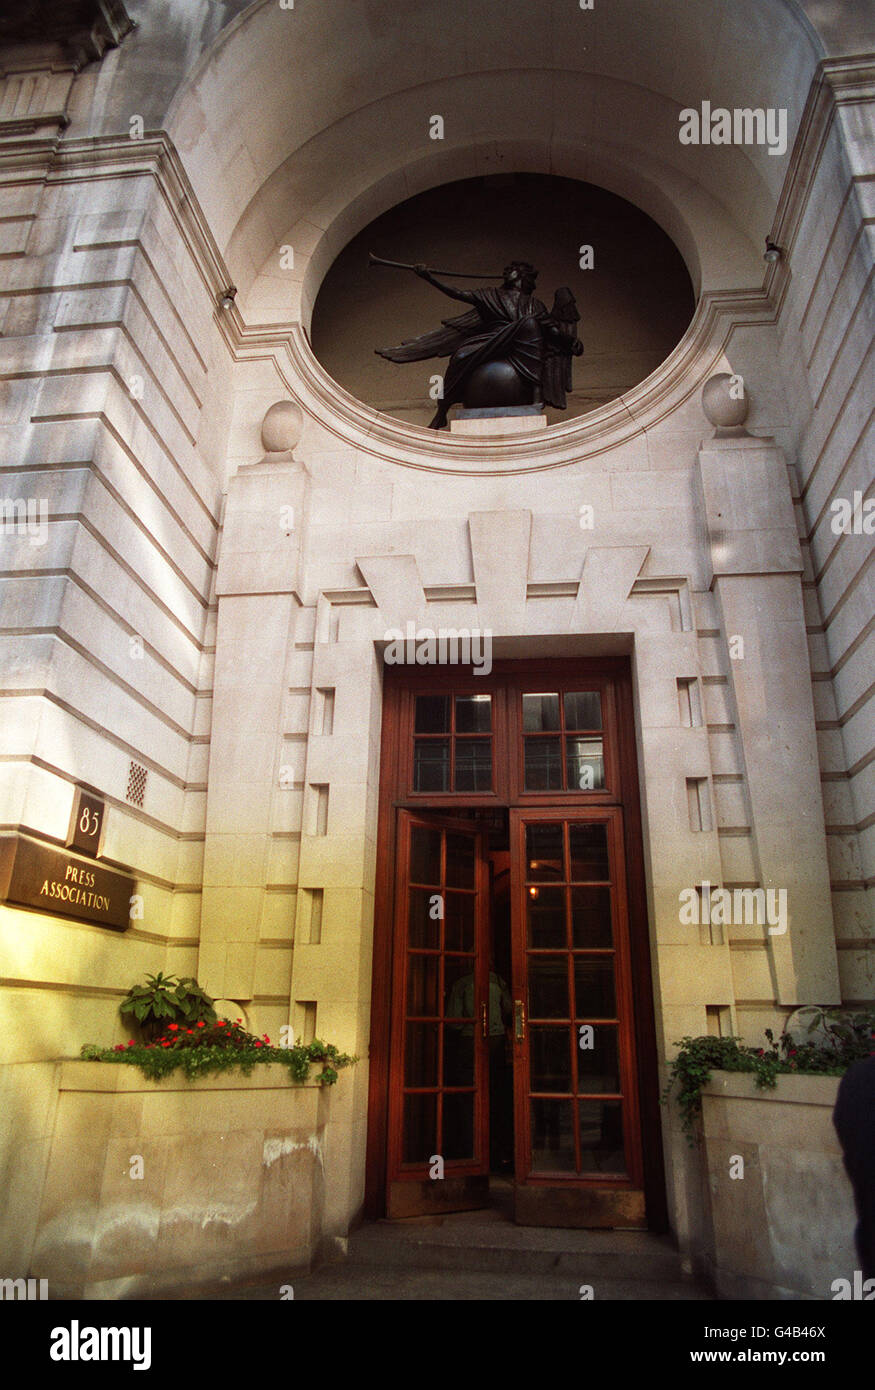 PA NEWS PHOTO MARCH 1992 THE FRONT ENTRANCE OF THE FORMER 'PA NEWS' BUILDING IN FLEET STREET, LONDON WHICH NOW BELONGS TO 'REUTERS' Stock Photo